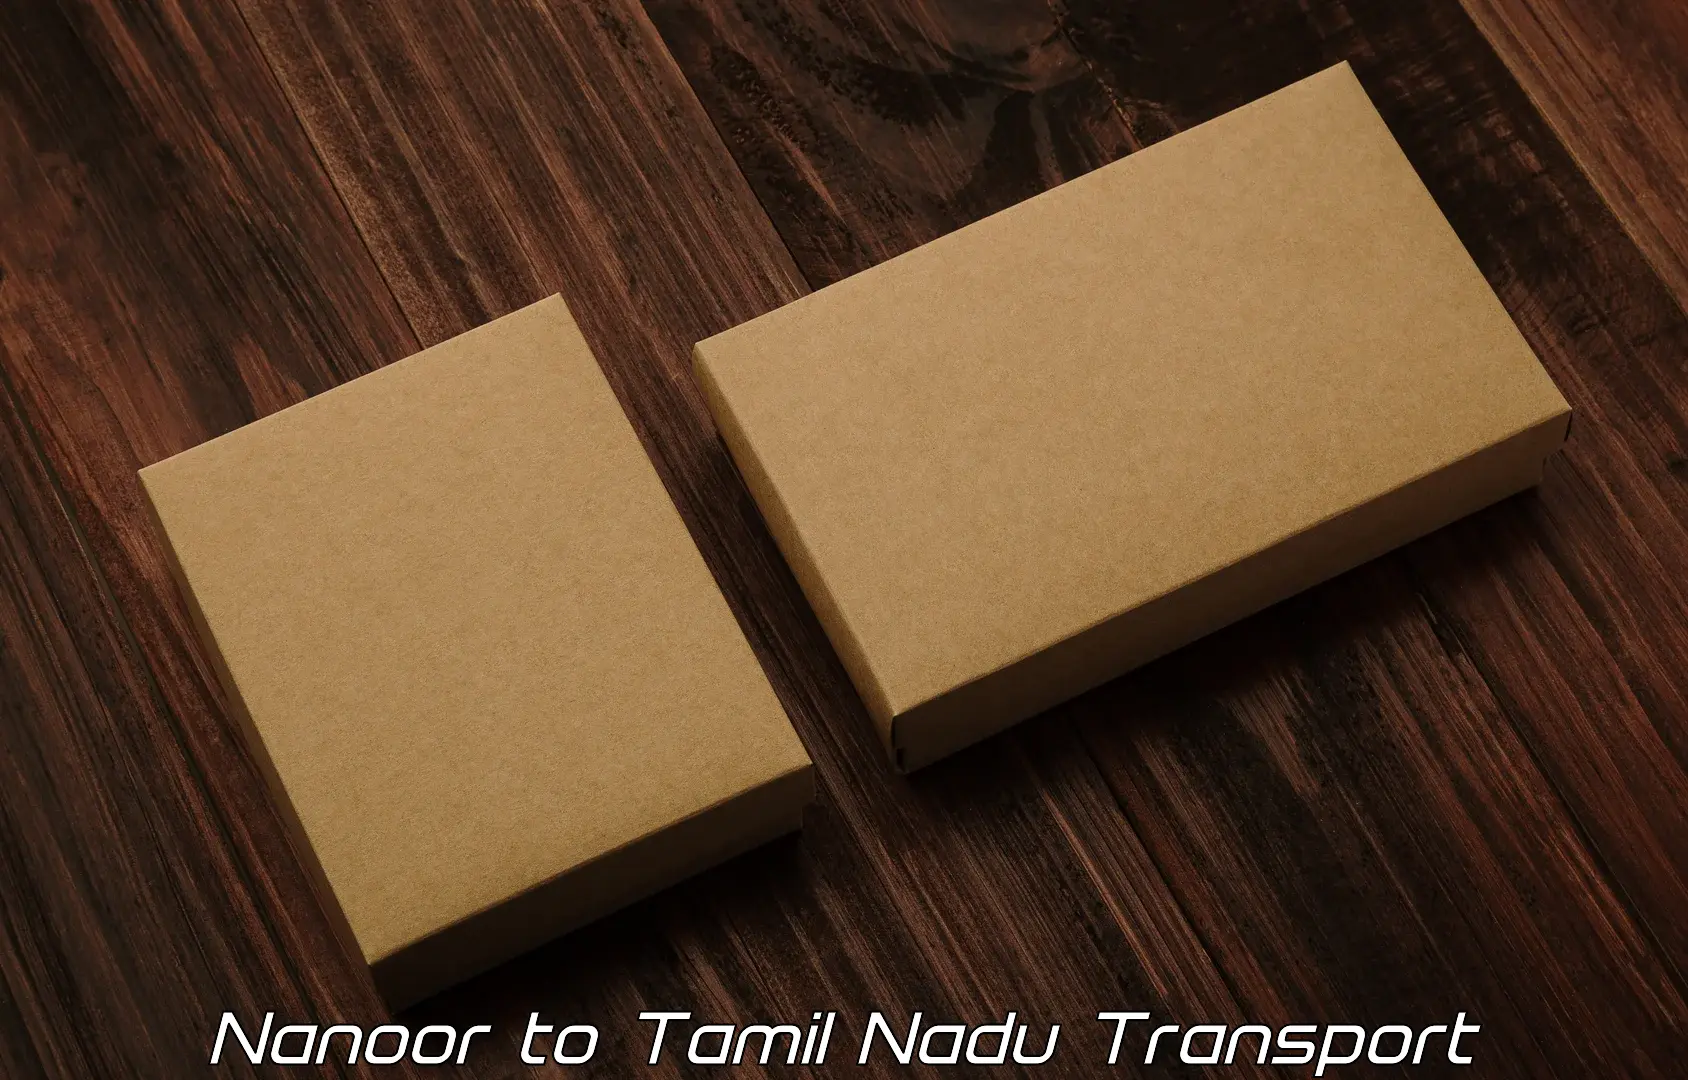 Part load transport service in India Nanoor to Chennai Port